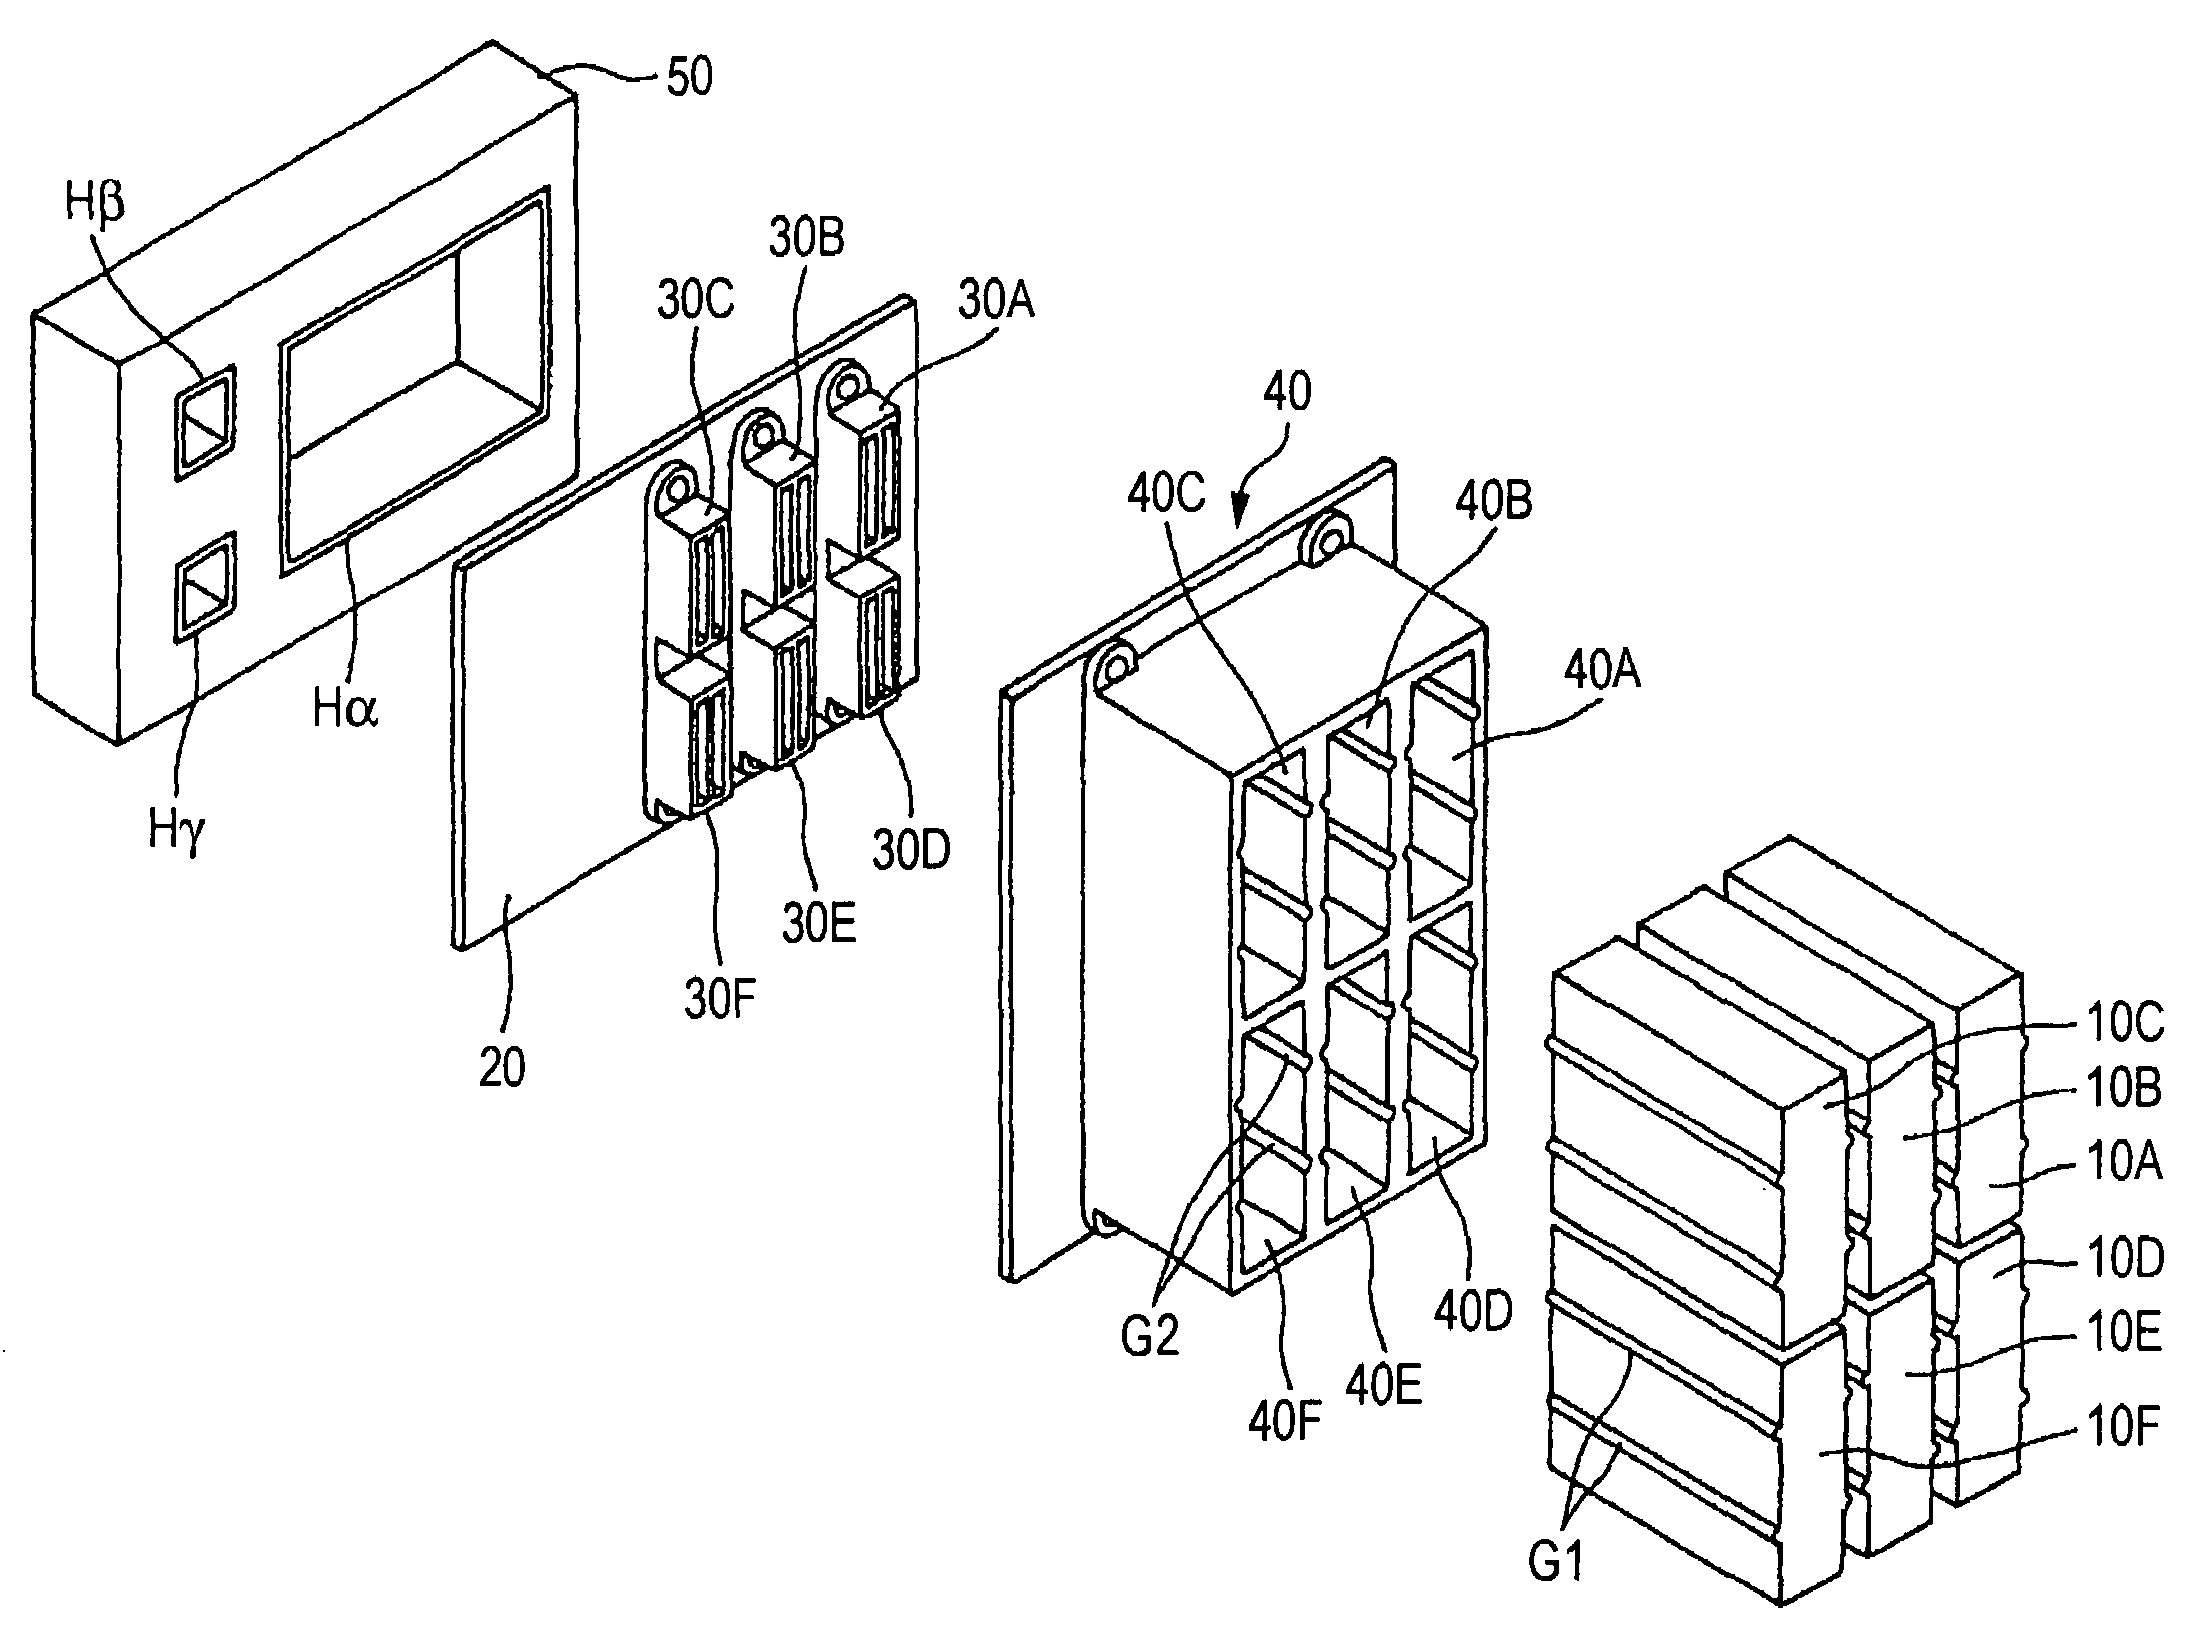 Apparatus equipped with electronic control units